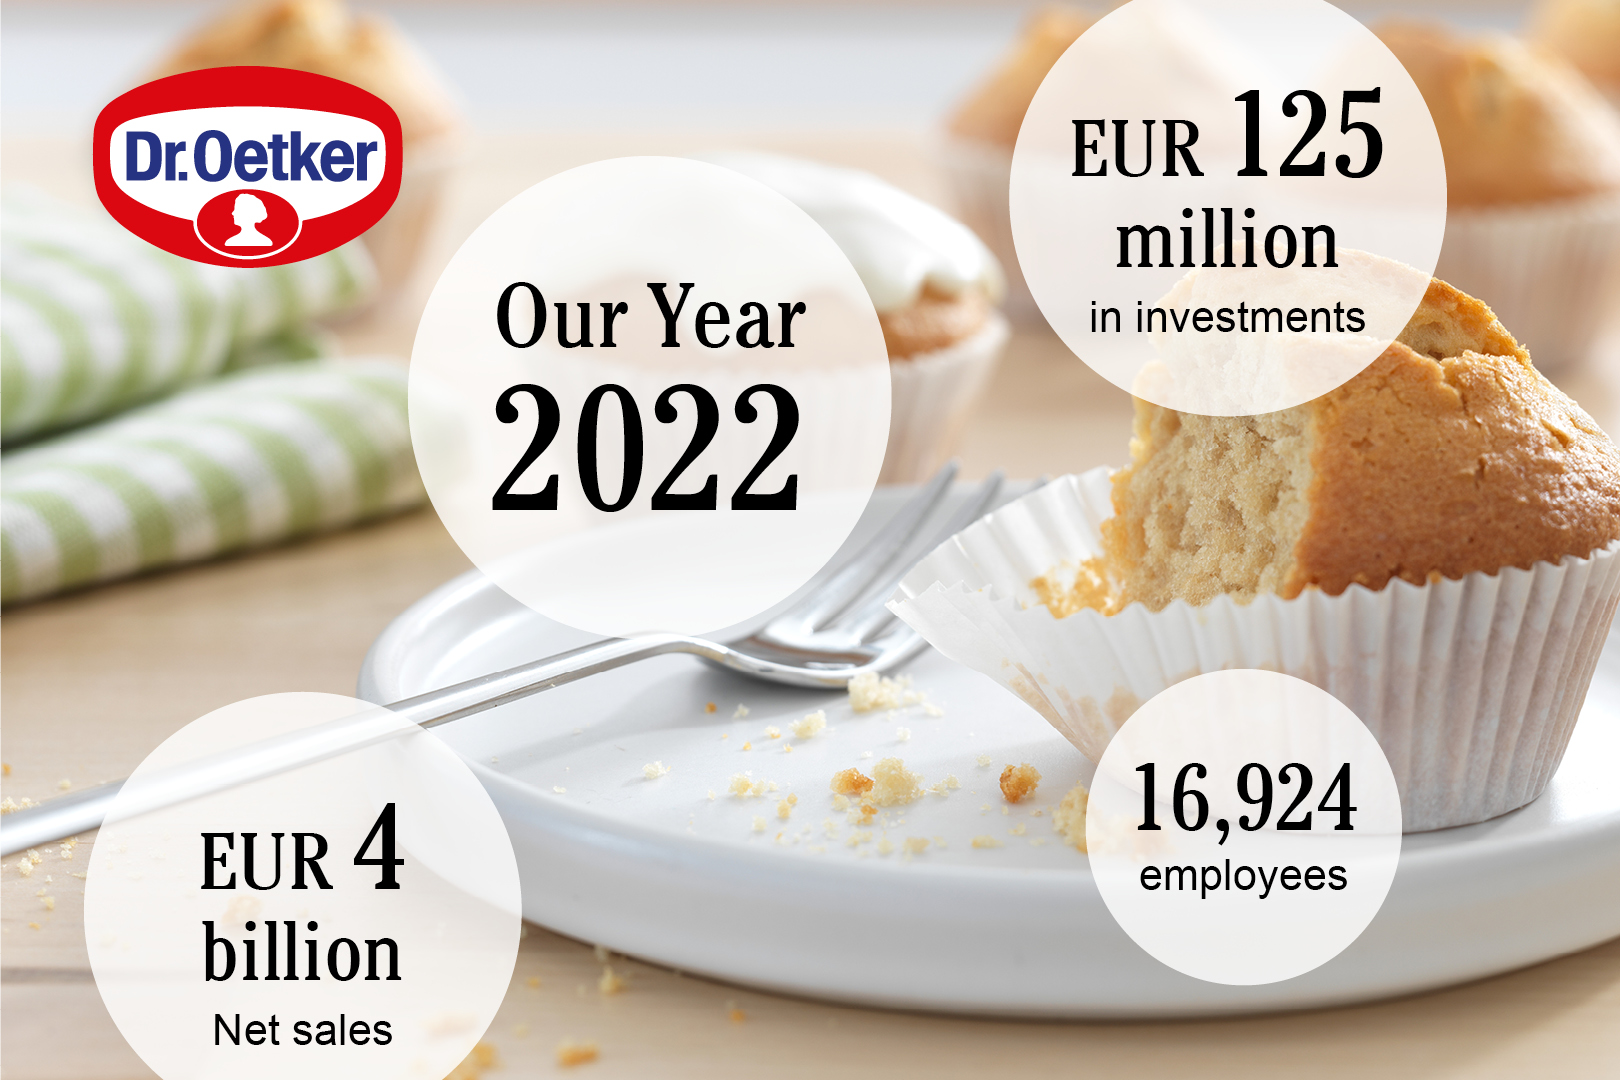 Dr. Oetker achieved sales growth in 2022